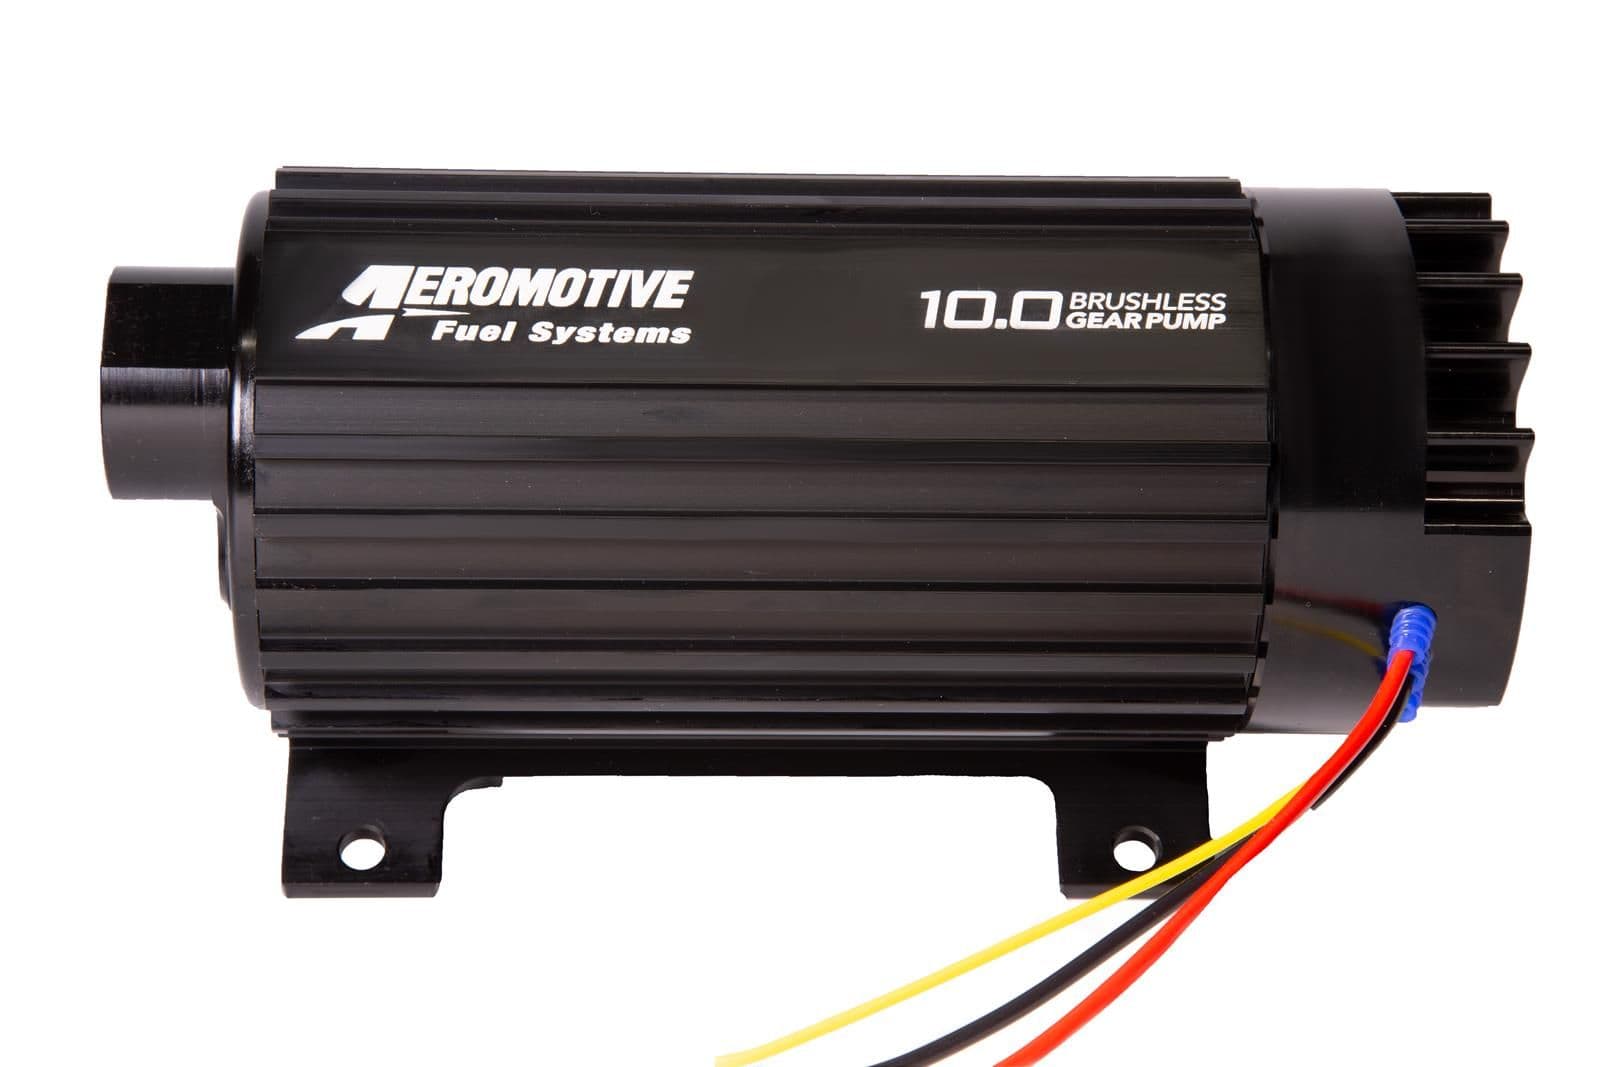 Engine - Intake/Fuel - Aeromotive 10.0 fuel pump - New - All Years Any Make All Models - Las Vegas, NV 89145, United States